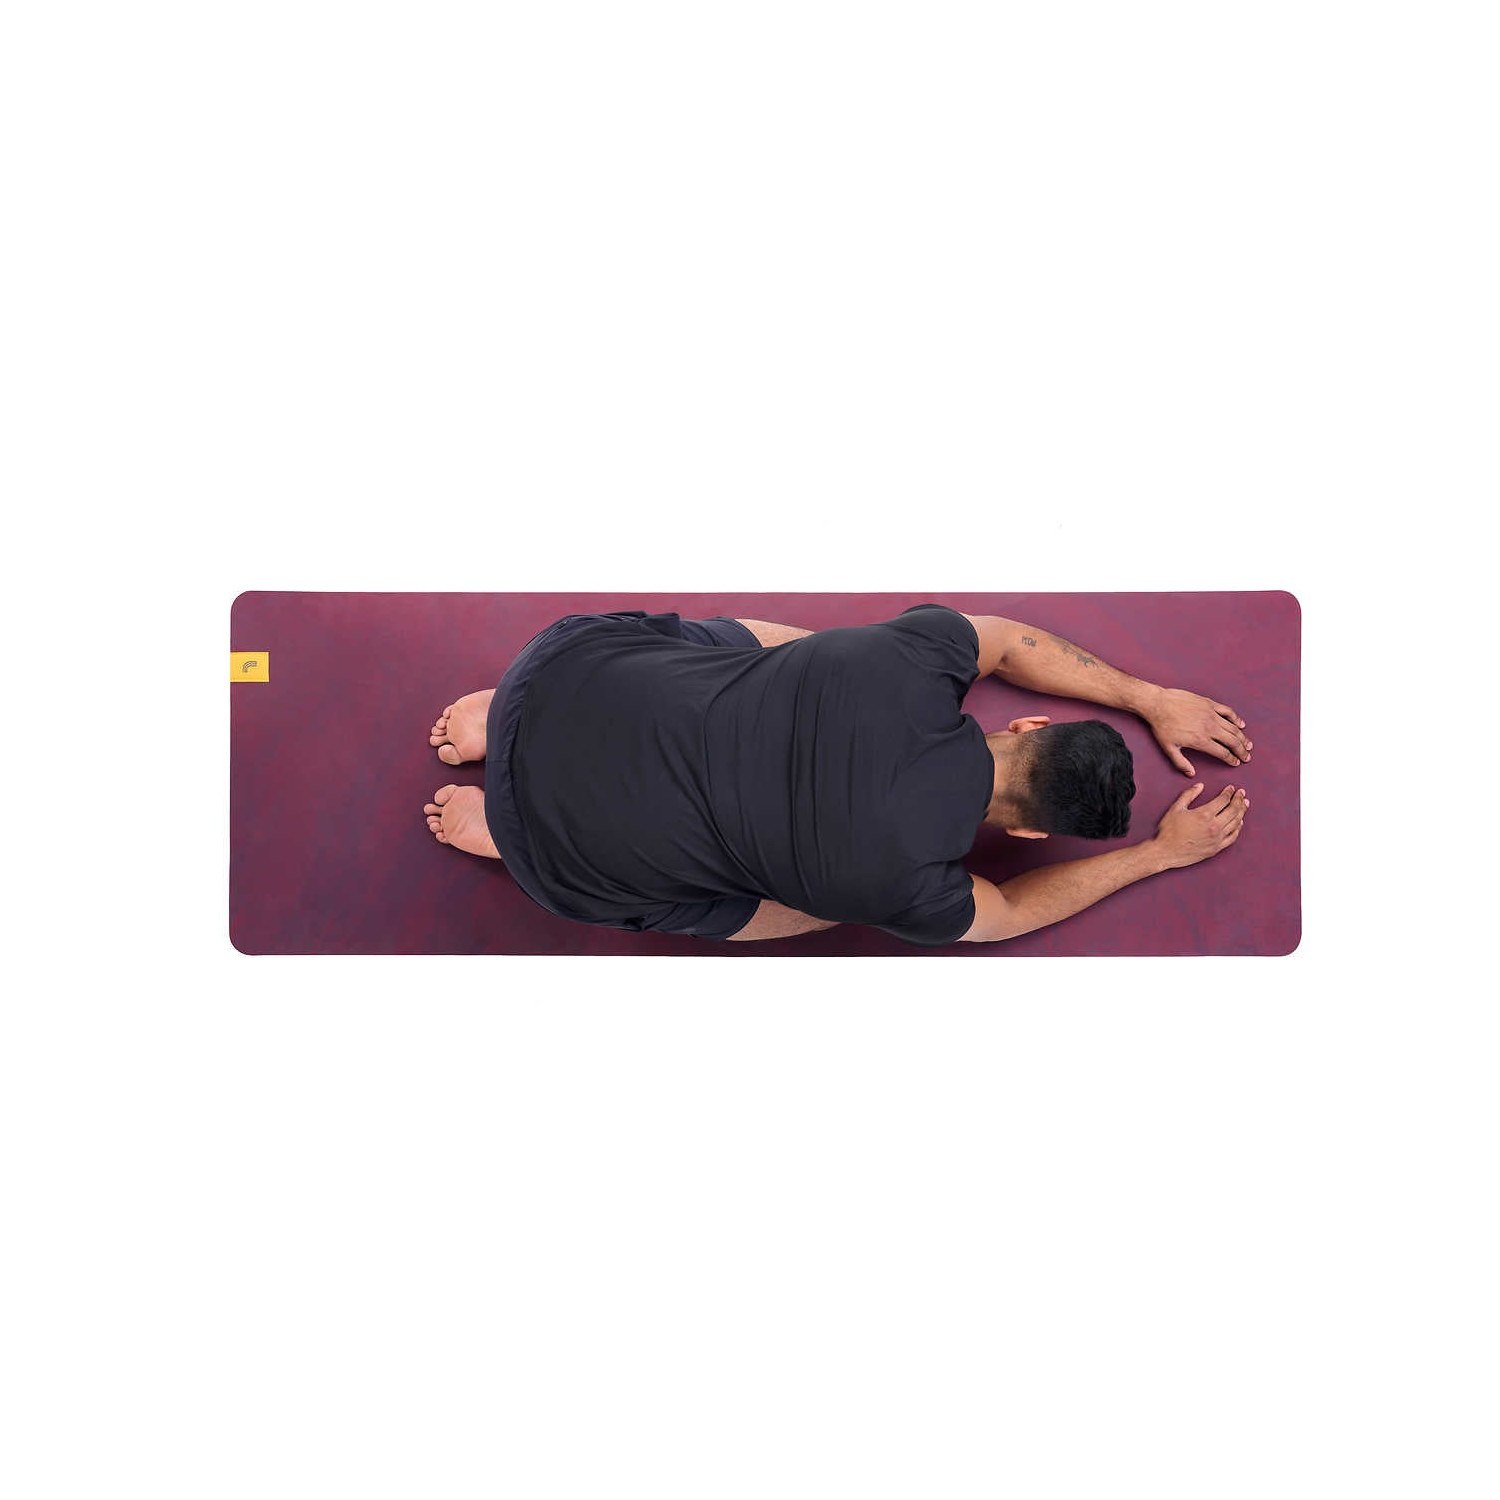 Prima LOLE Yoga Mat plus 2-in-1 Strap and Resistance Band, Mats -   Canada